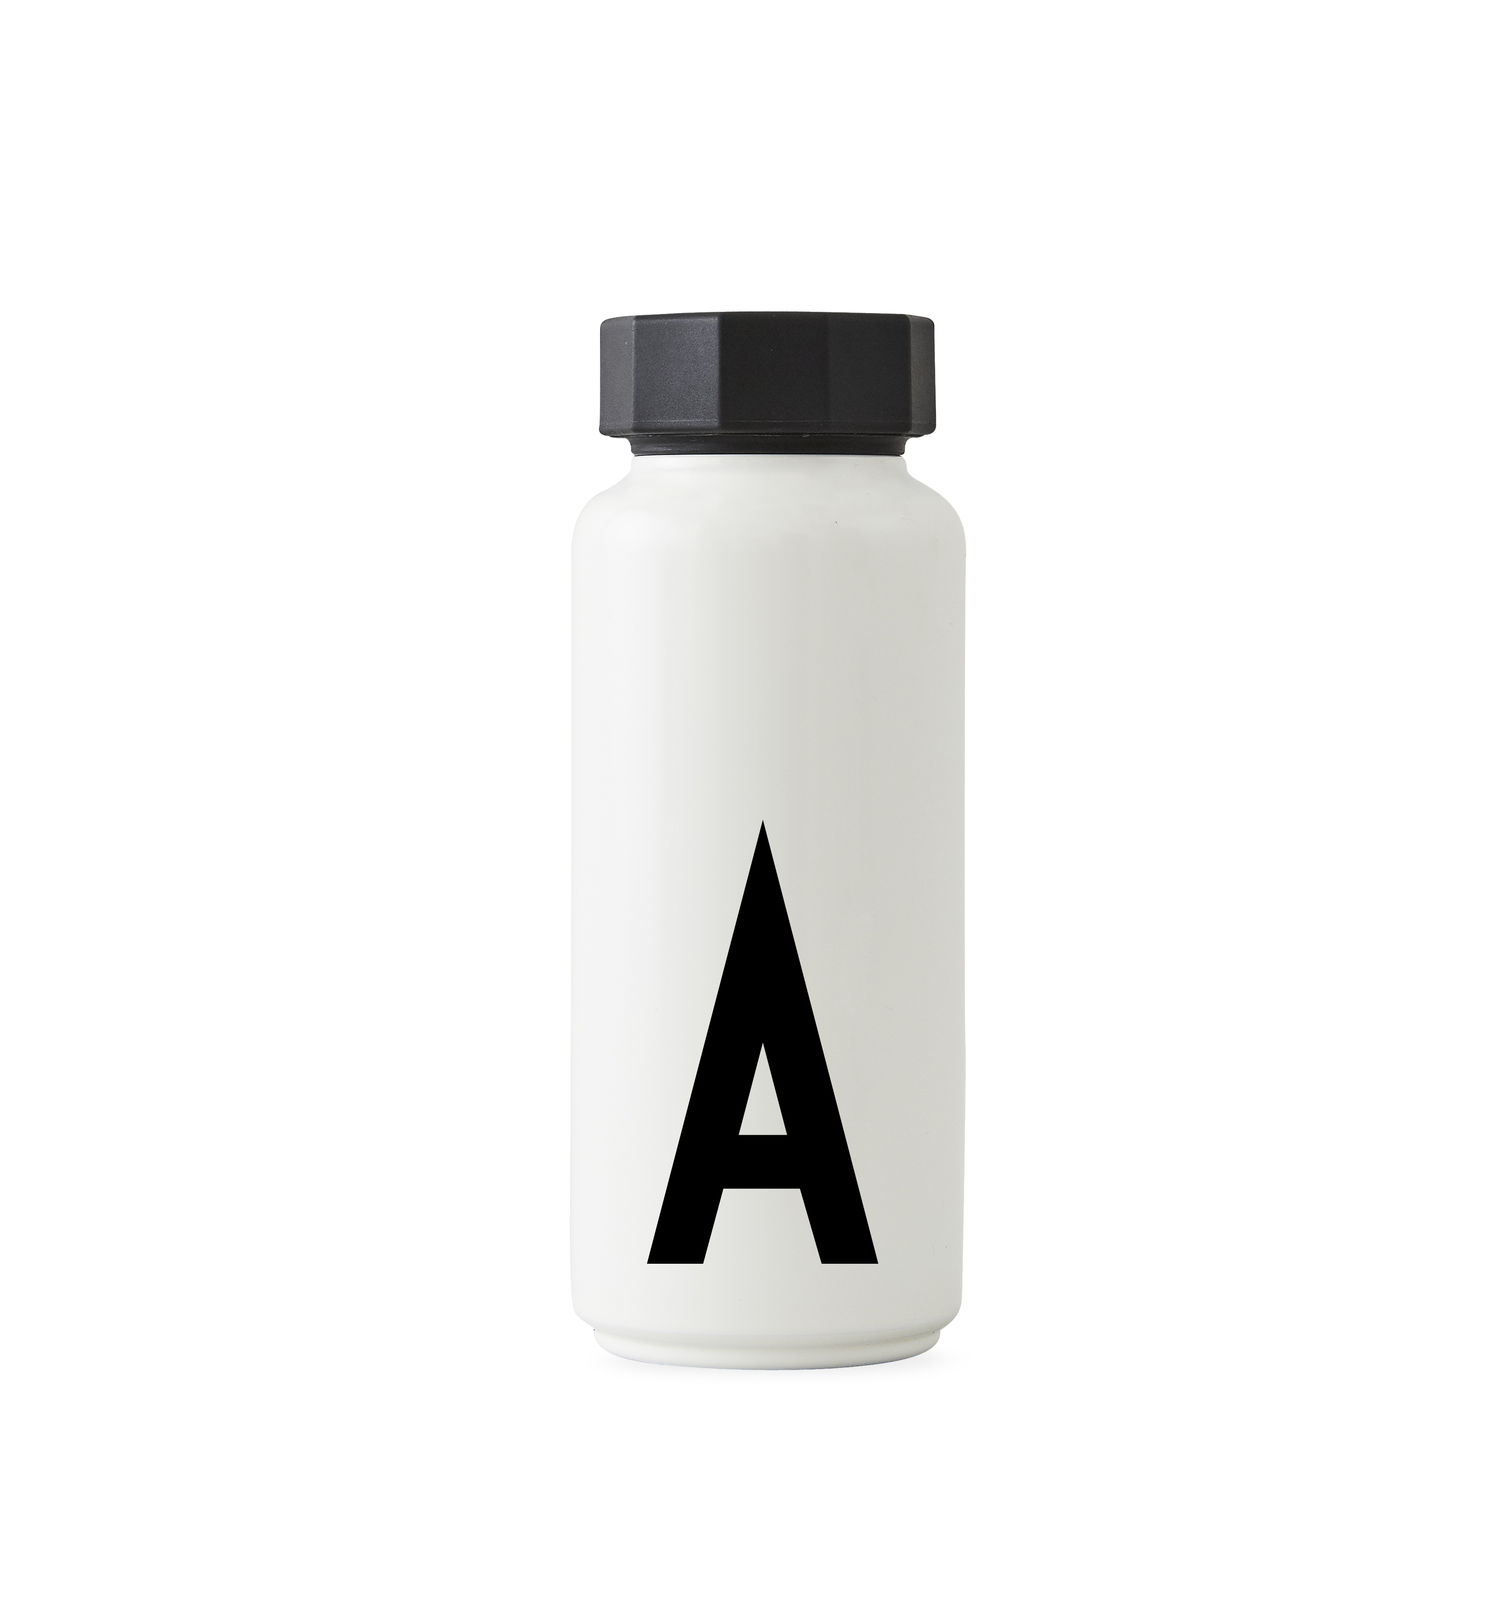 Design Letters - Personal Thermos - A